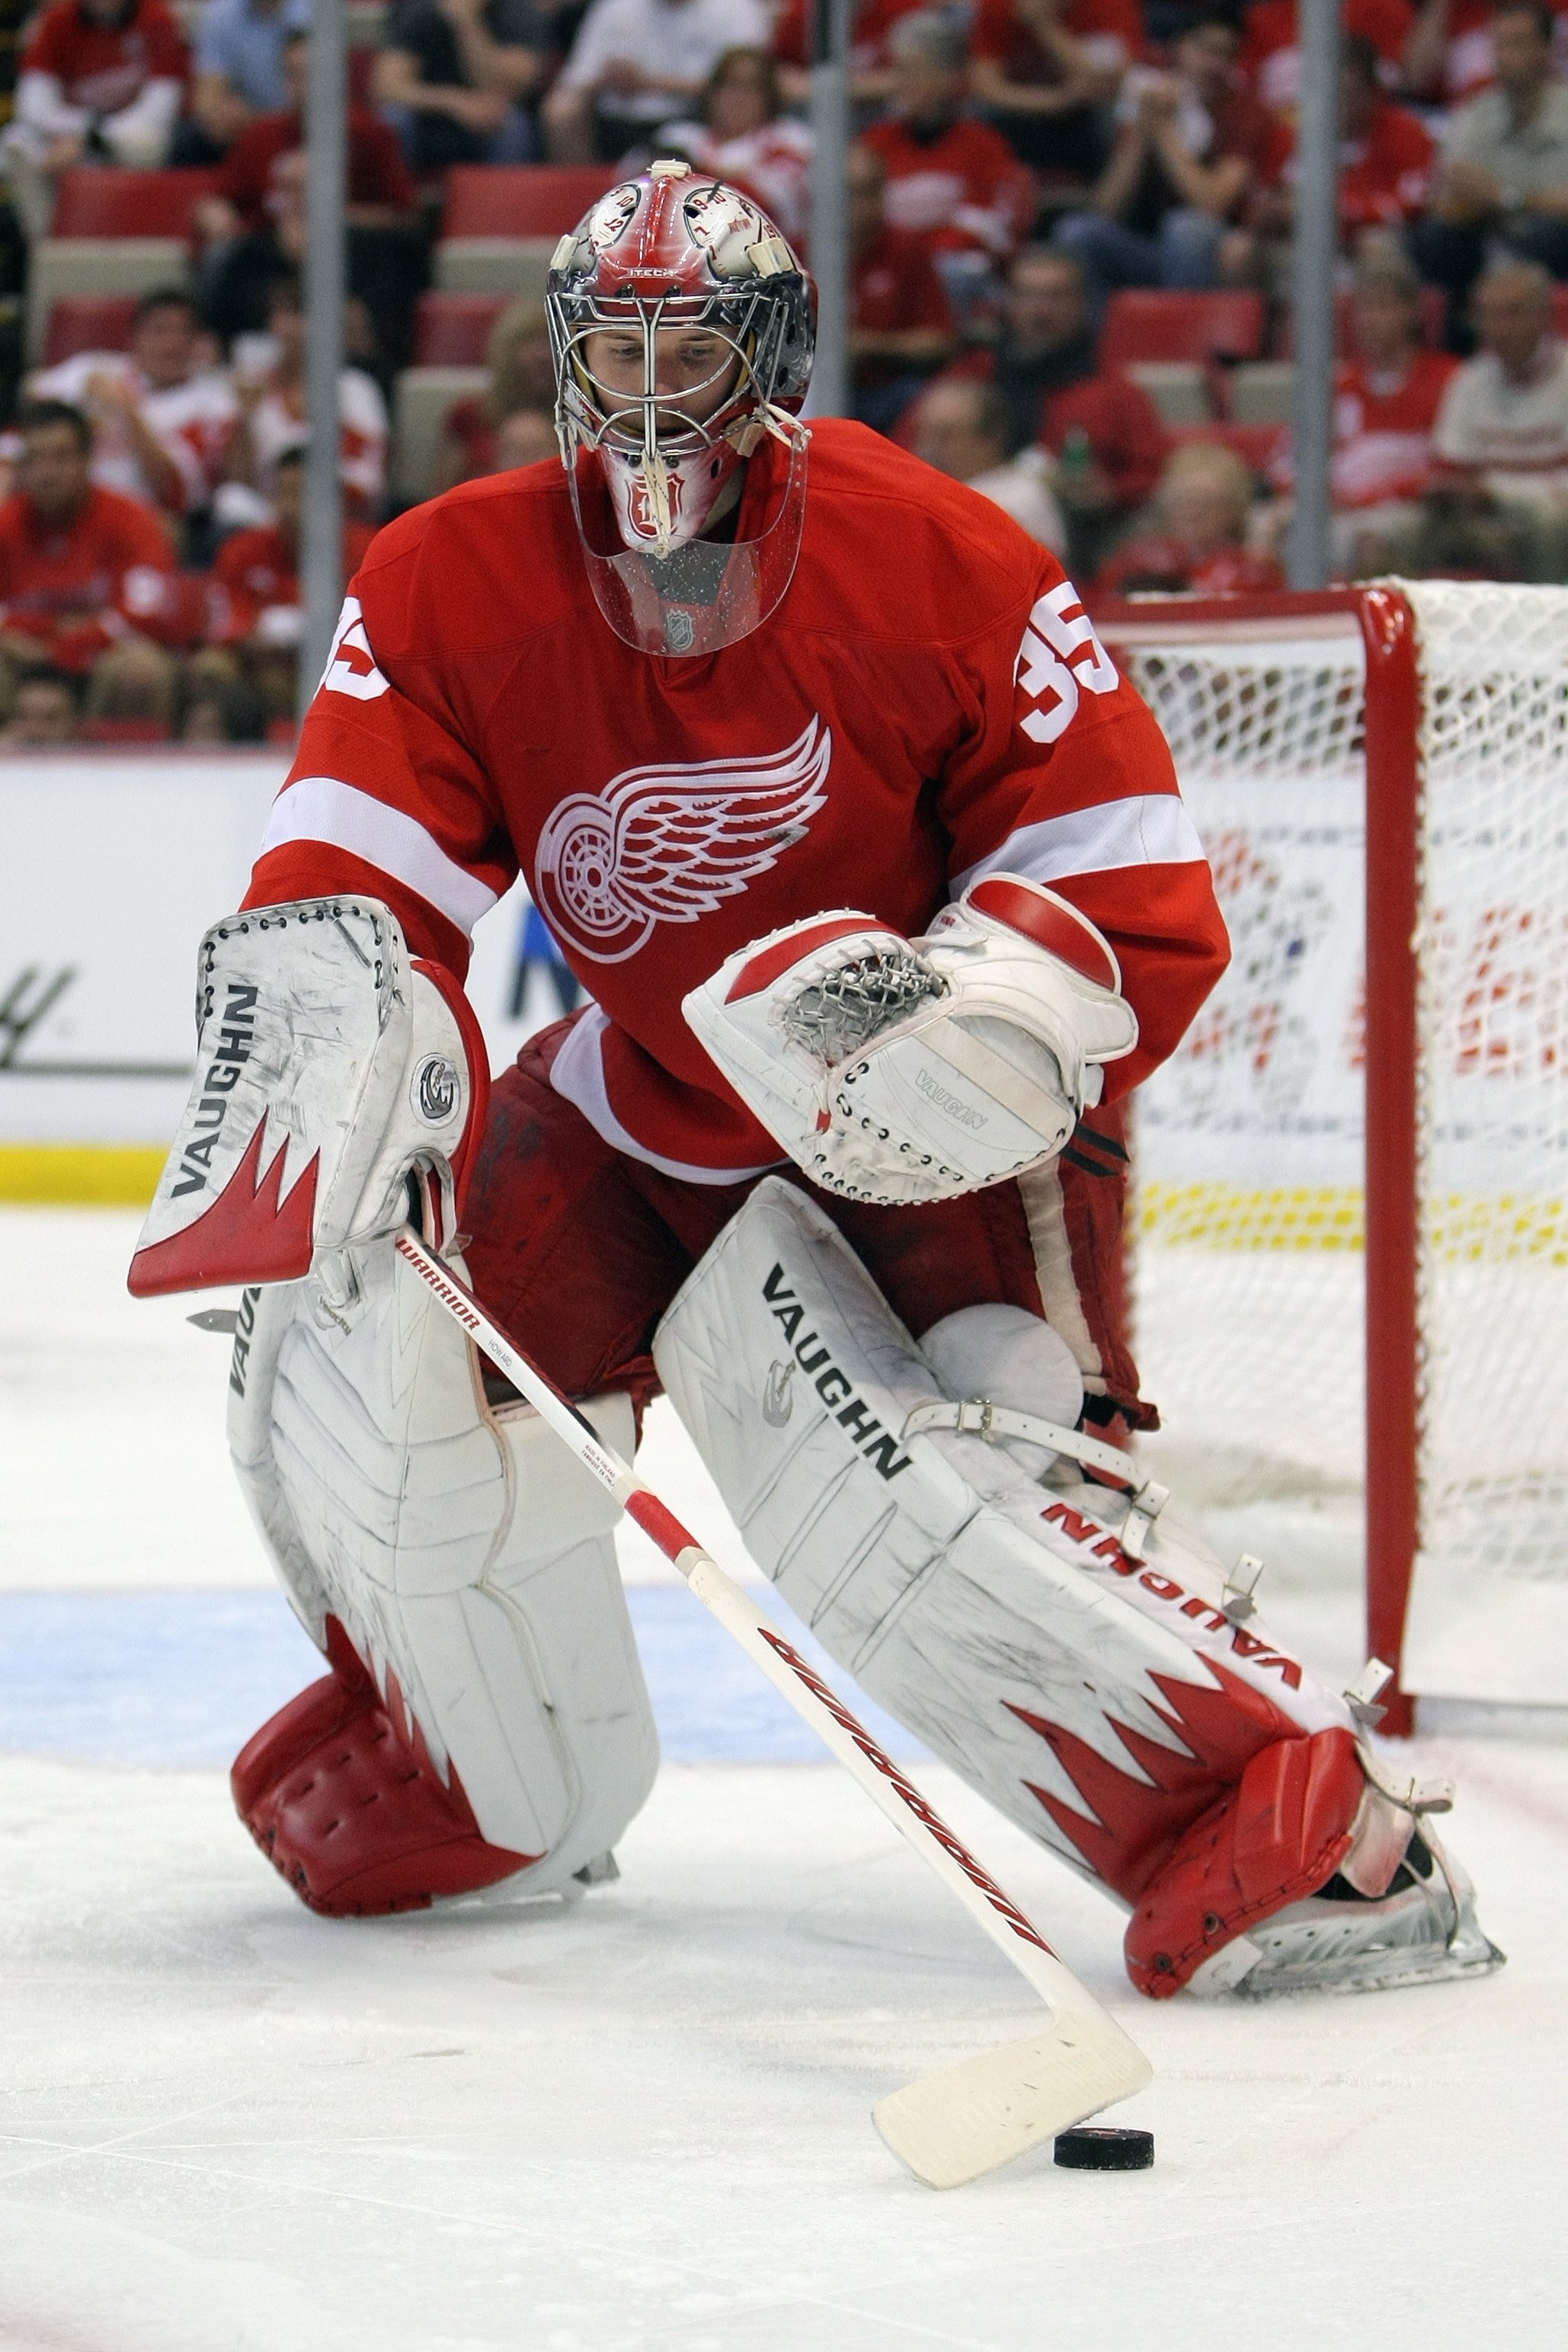 DETROIT - MAY 4:  Jimmy Howard #35 of the Detroit Red Wings defends the net against the San Jose Sharks in Game Three of the Western Conference Semifinals during the 2010 Stanley Cup Playoffs at Joe Louis Arena on May 4, 2010 in Detroit, Michigan. (Photo